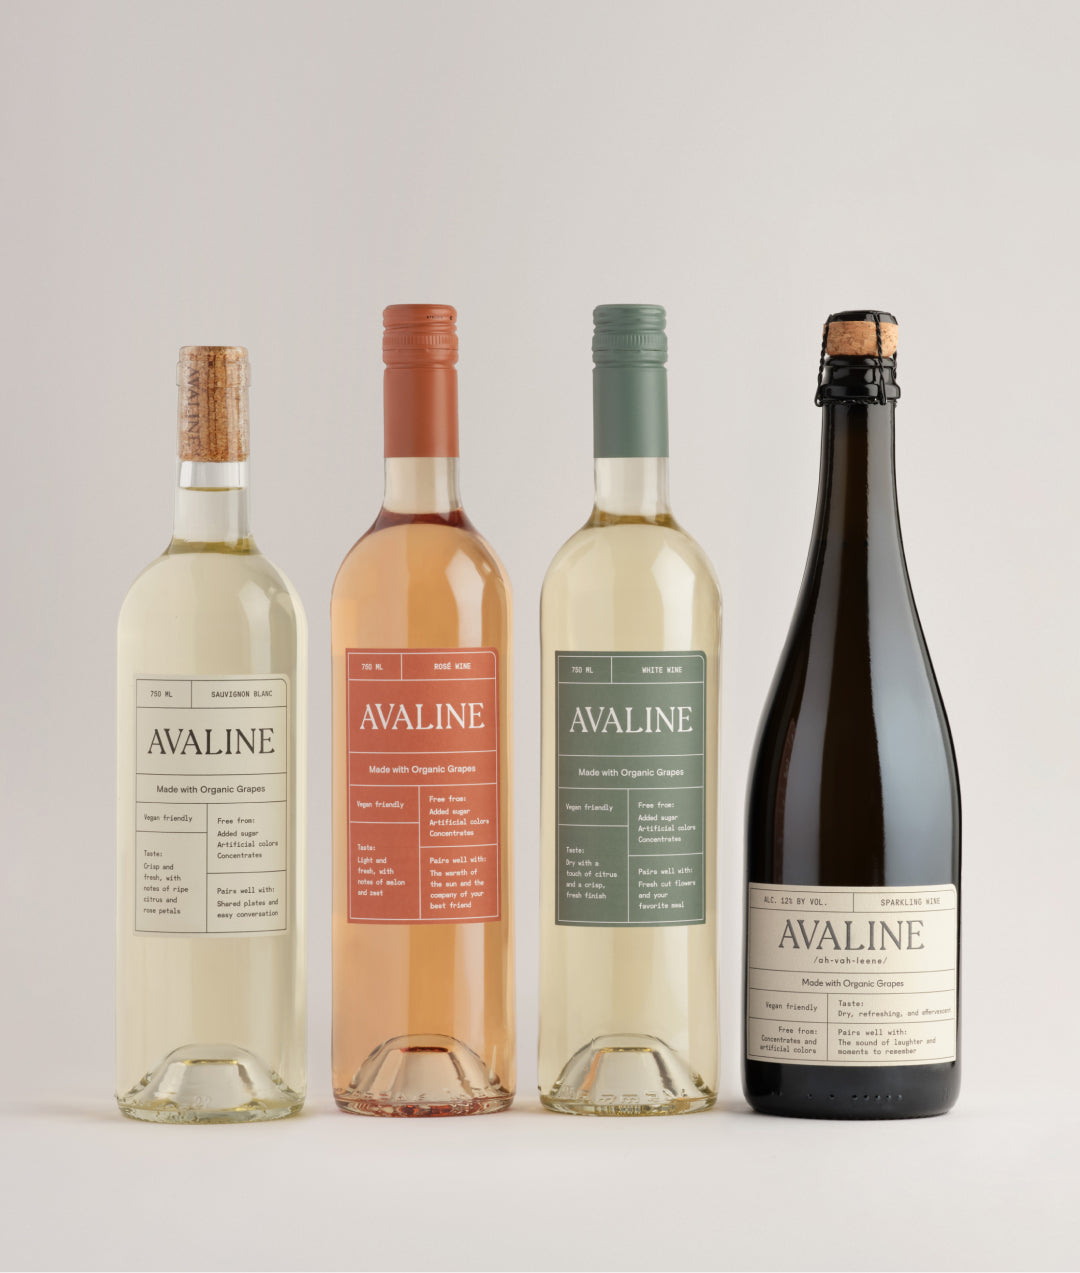 A lineup of wine bottles featuring Avaline White, Rosé, Sauvignon Blanc and Sparkling against a white background.